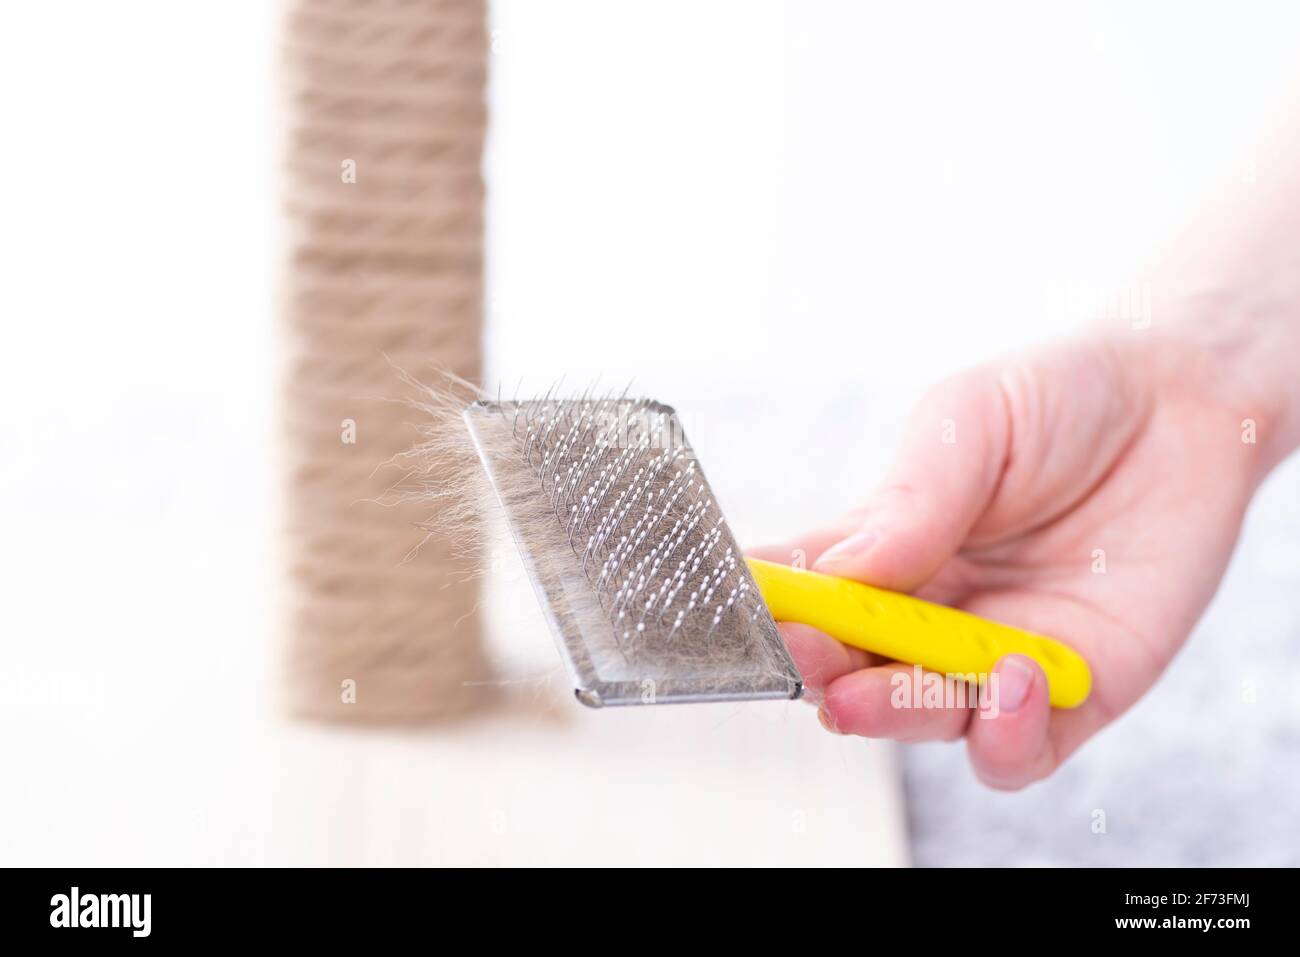 Cleaning pet hair with remover. Cleaning furniture from wool. Domestic cleaning tool of dandruff, hair, debris, pet wool and fluff Stock Photo